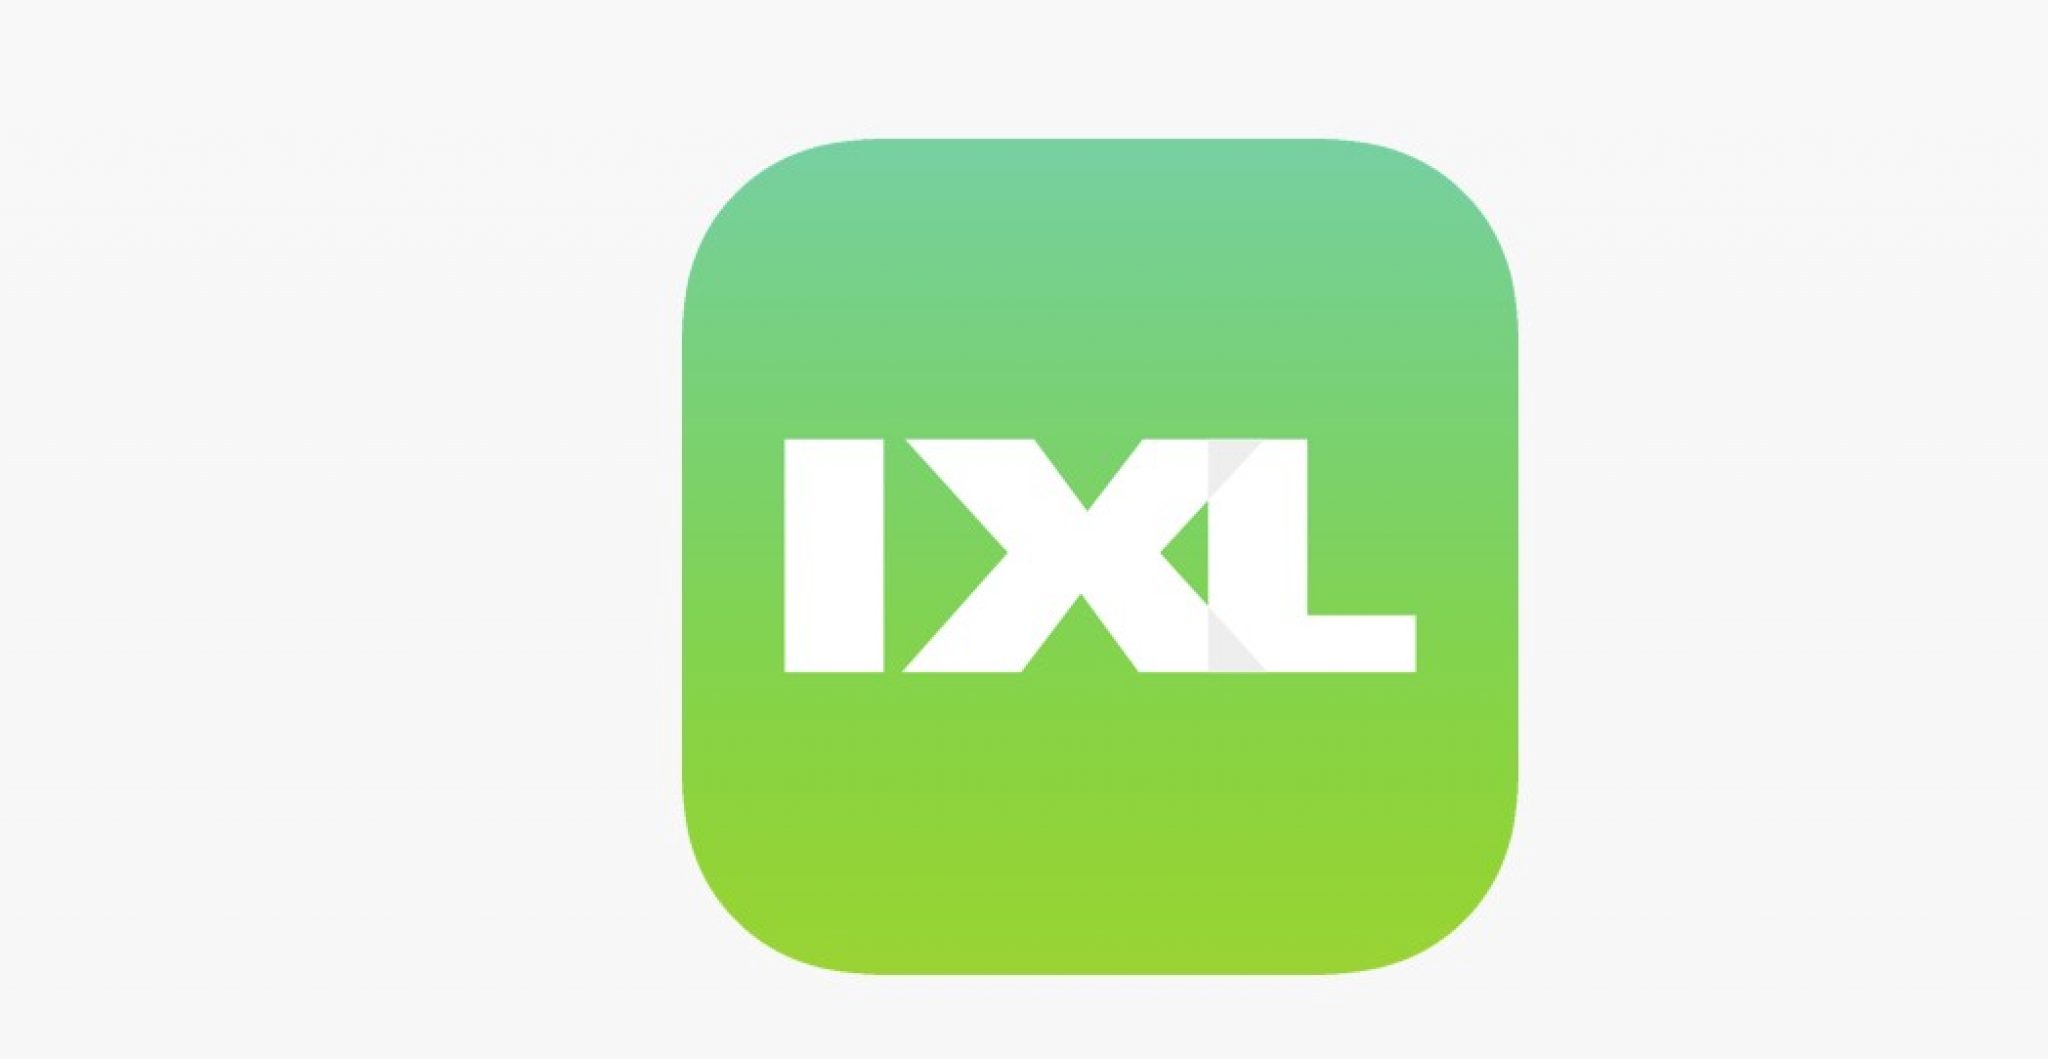 Is There A Way To Hack Ixl